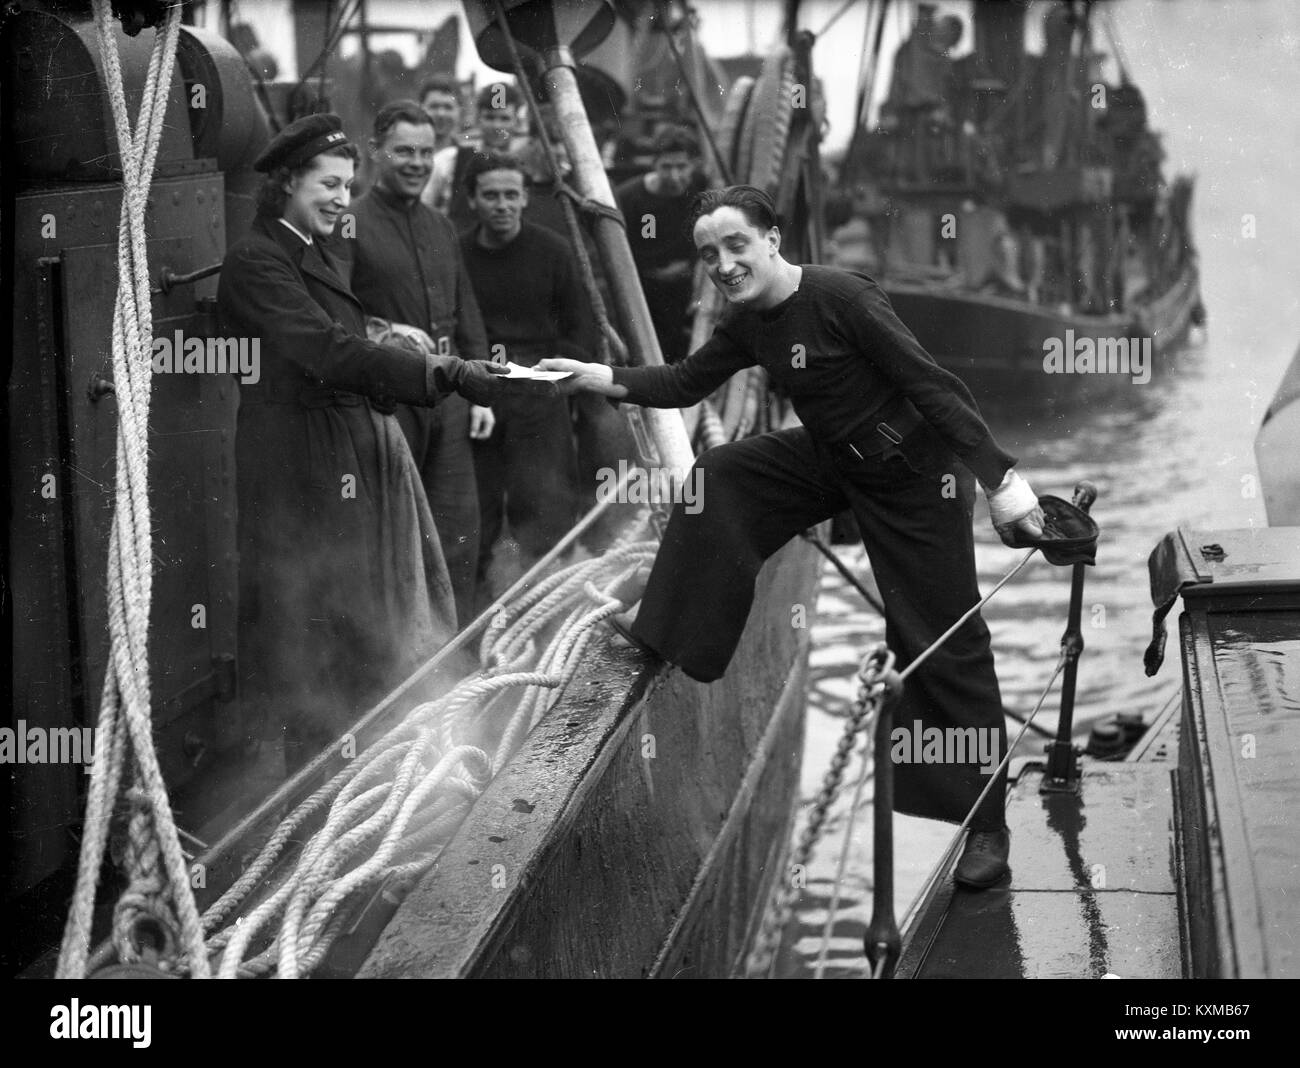 British sailor collects letters from Royal Navy 'Mail Boat' during the Second World War at Southampton 1941 Stock Photo